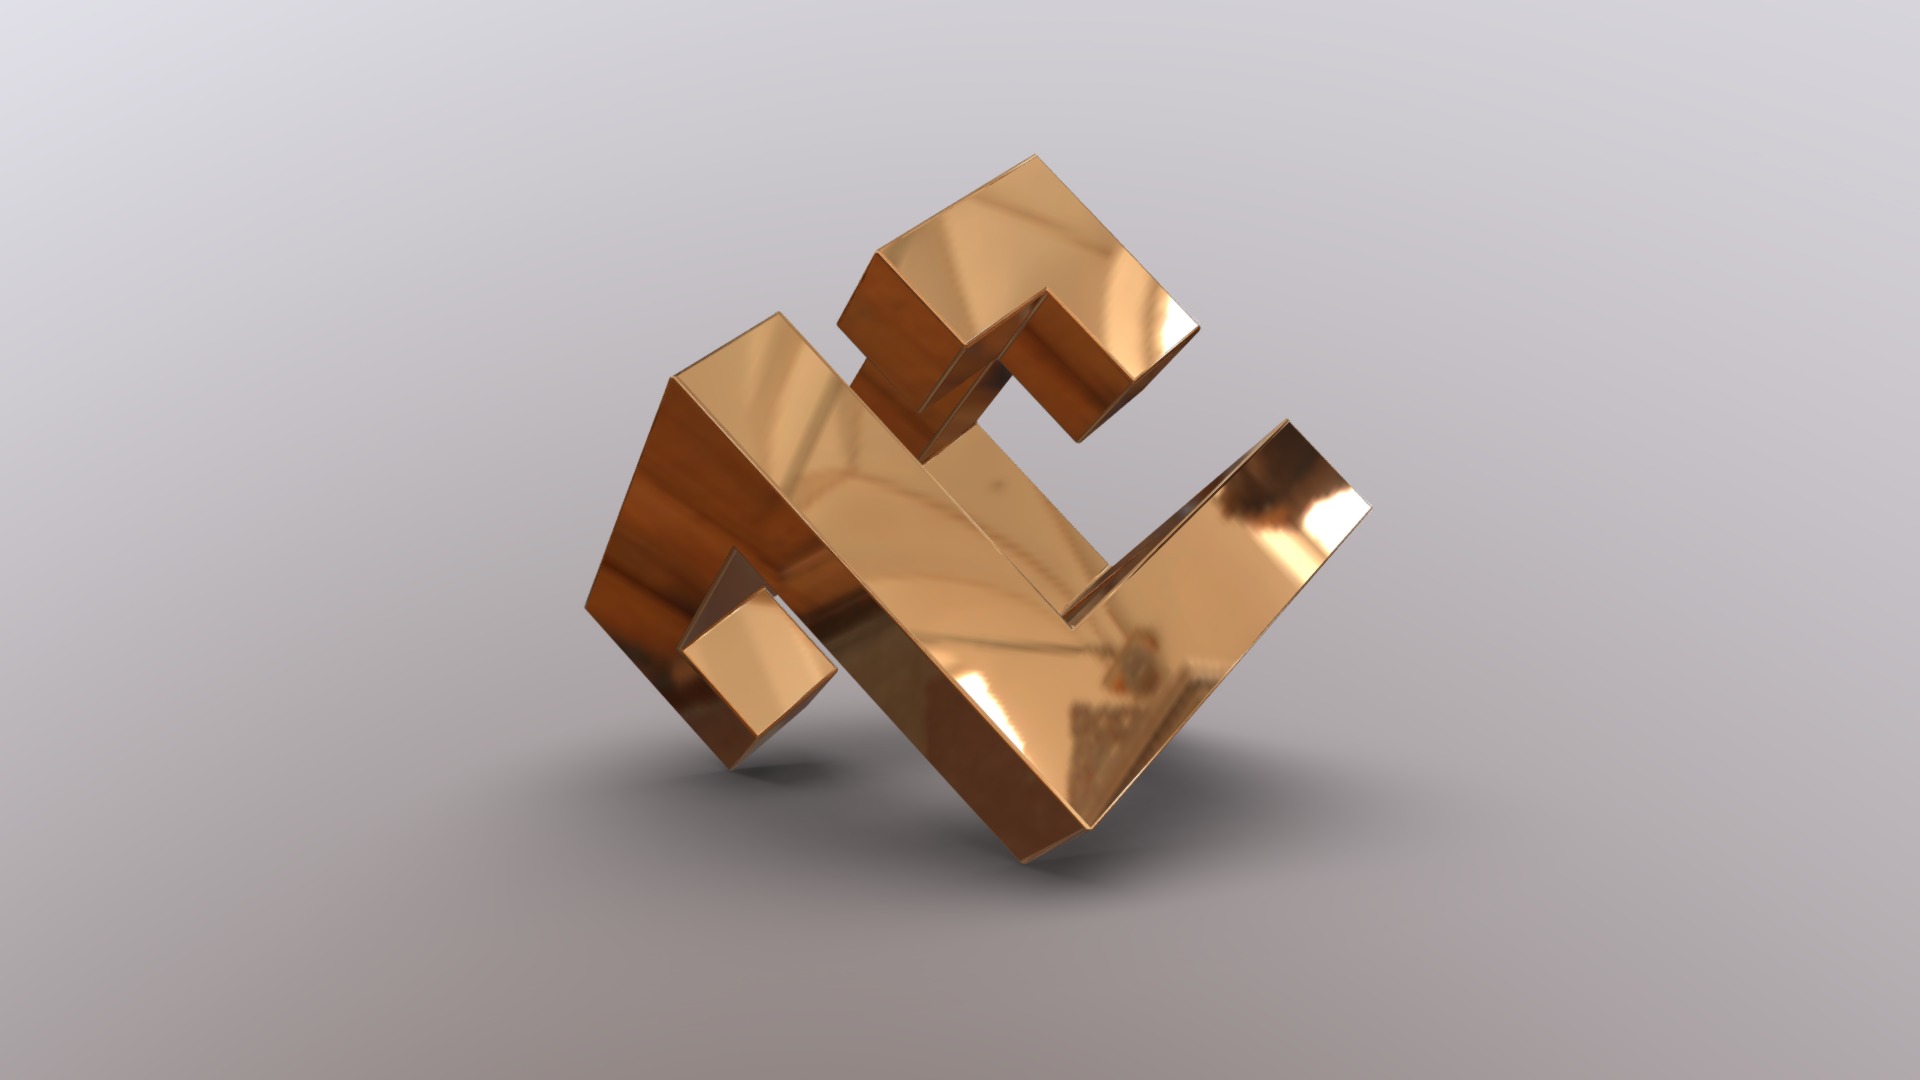 3D model JOSECHO LOPEZ LLORENS - This is a 3D model of the JOSECHO LOPEZ LLORENS. The 3D model is about a wooden cube with a light on top.